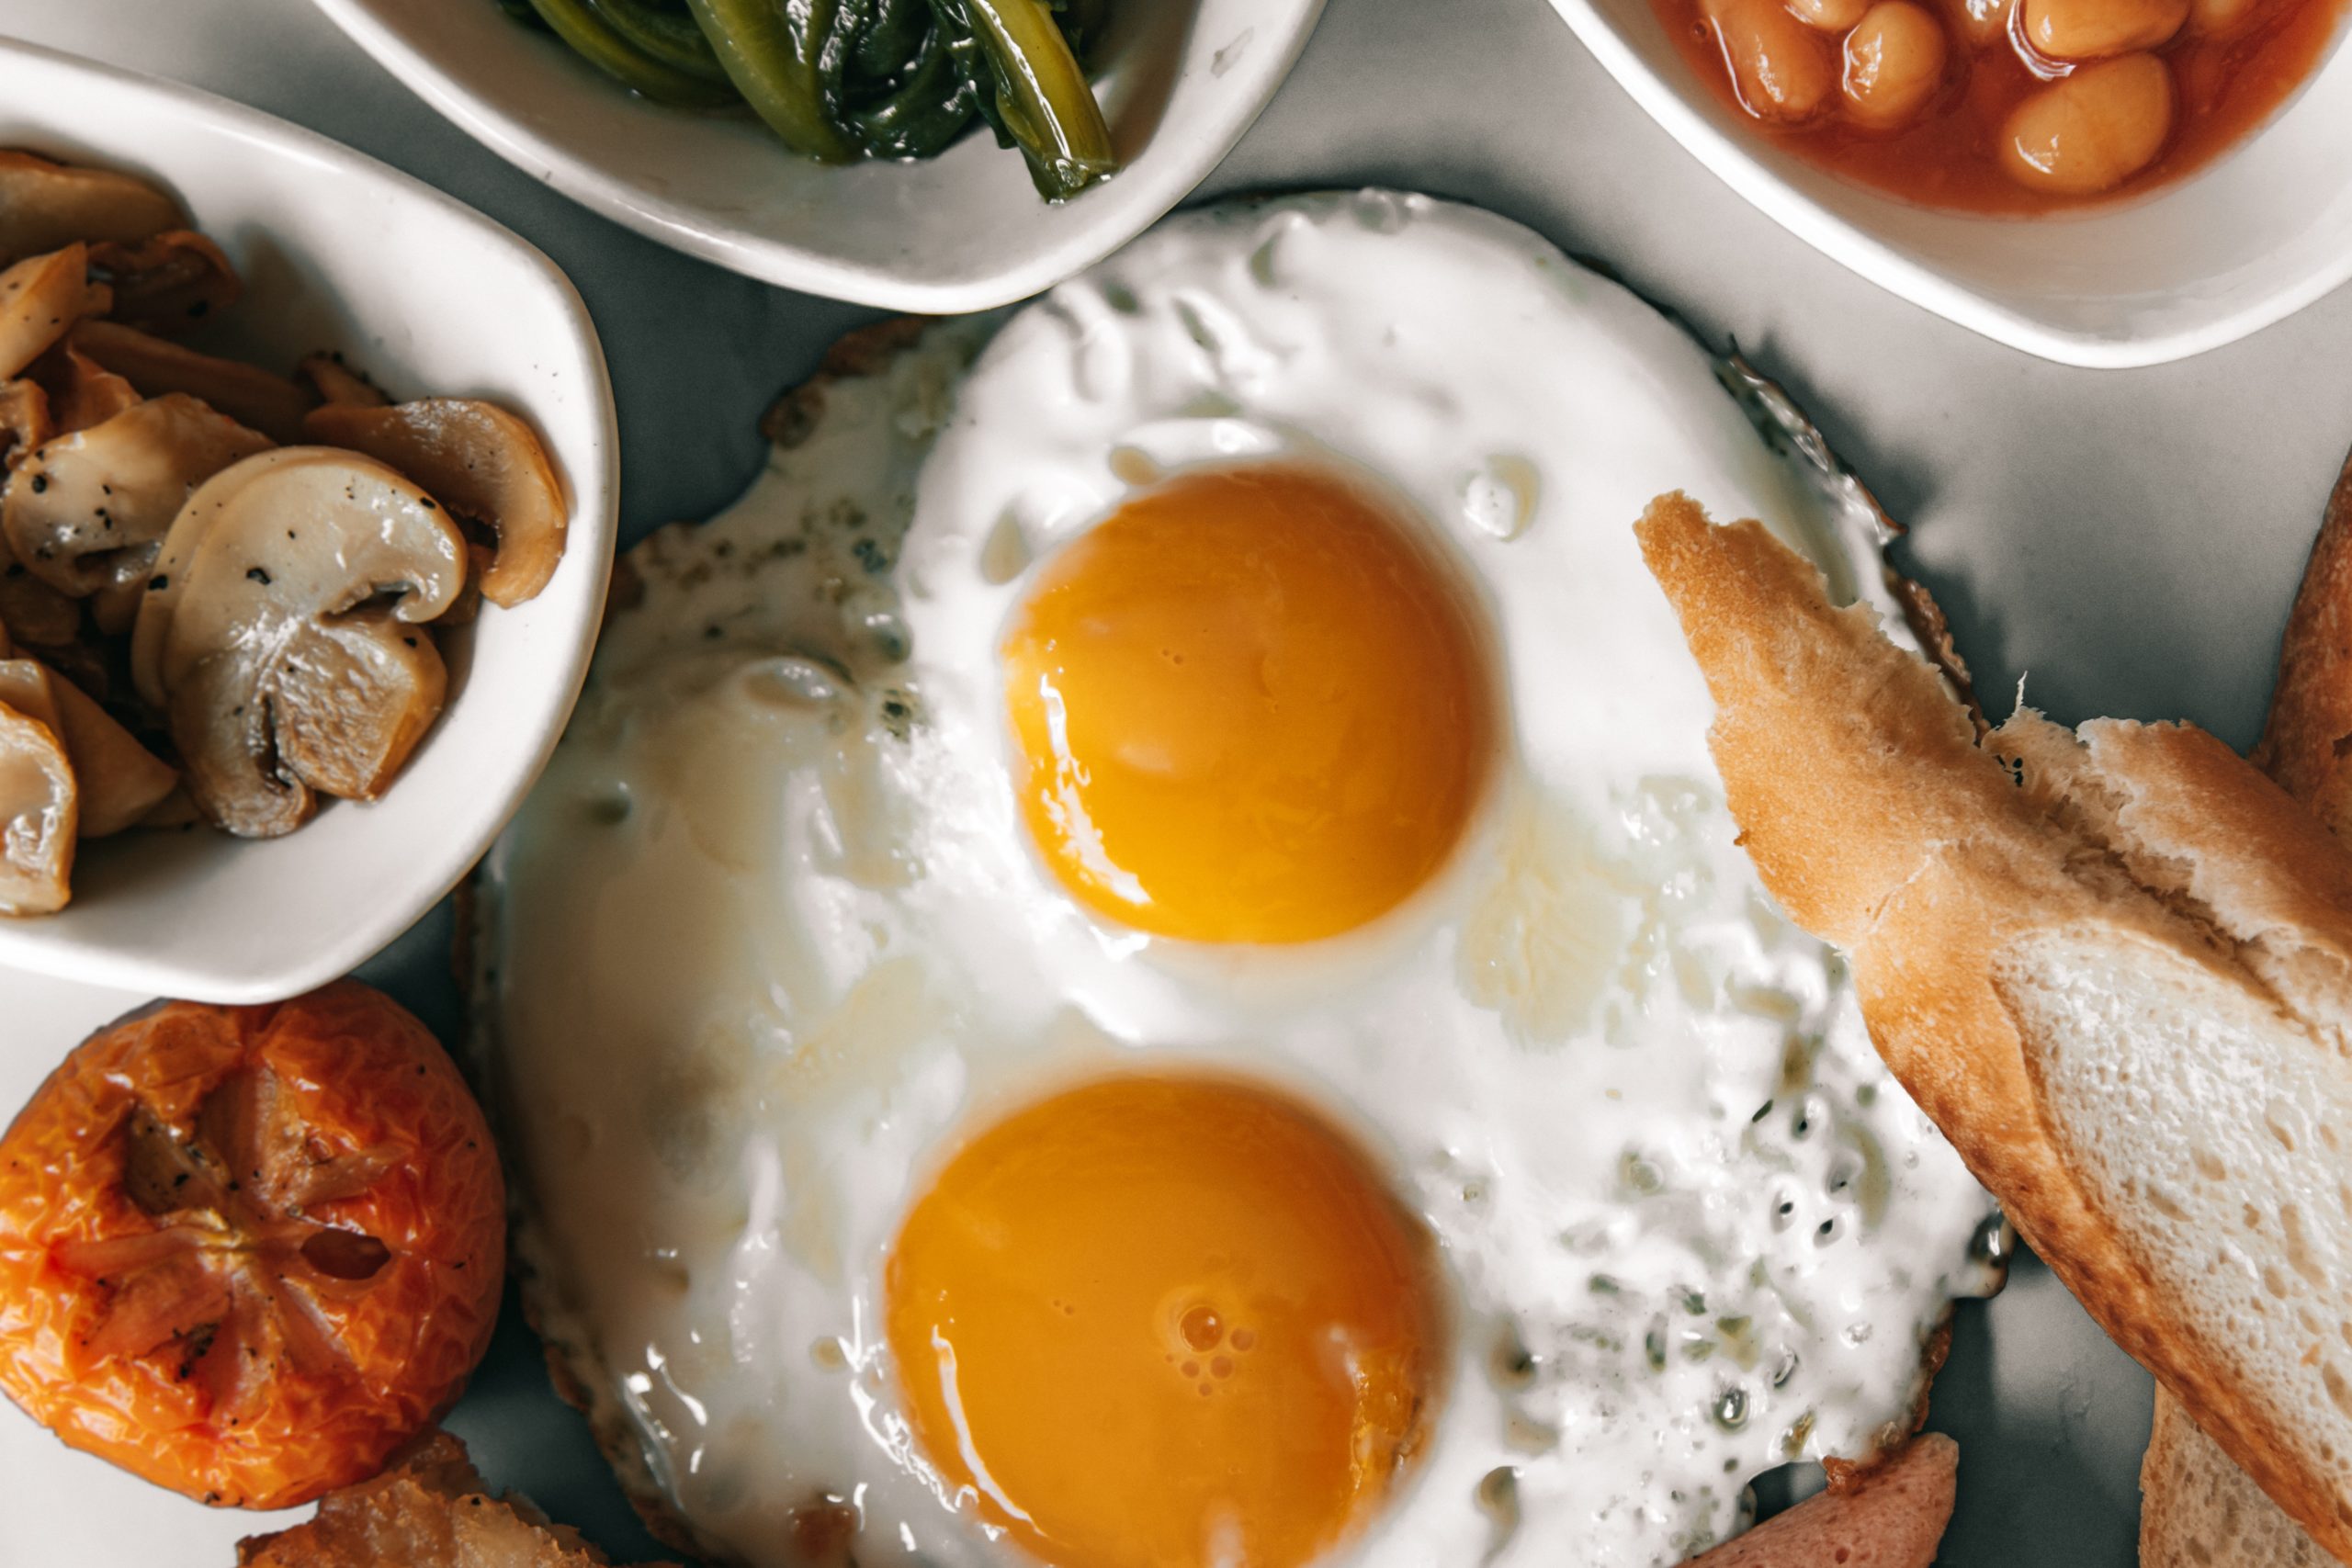 Two fried eggs. Eggs are a great source of iodine. Image from Pexels.